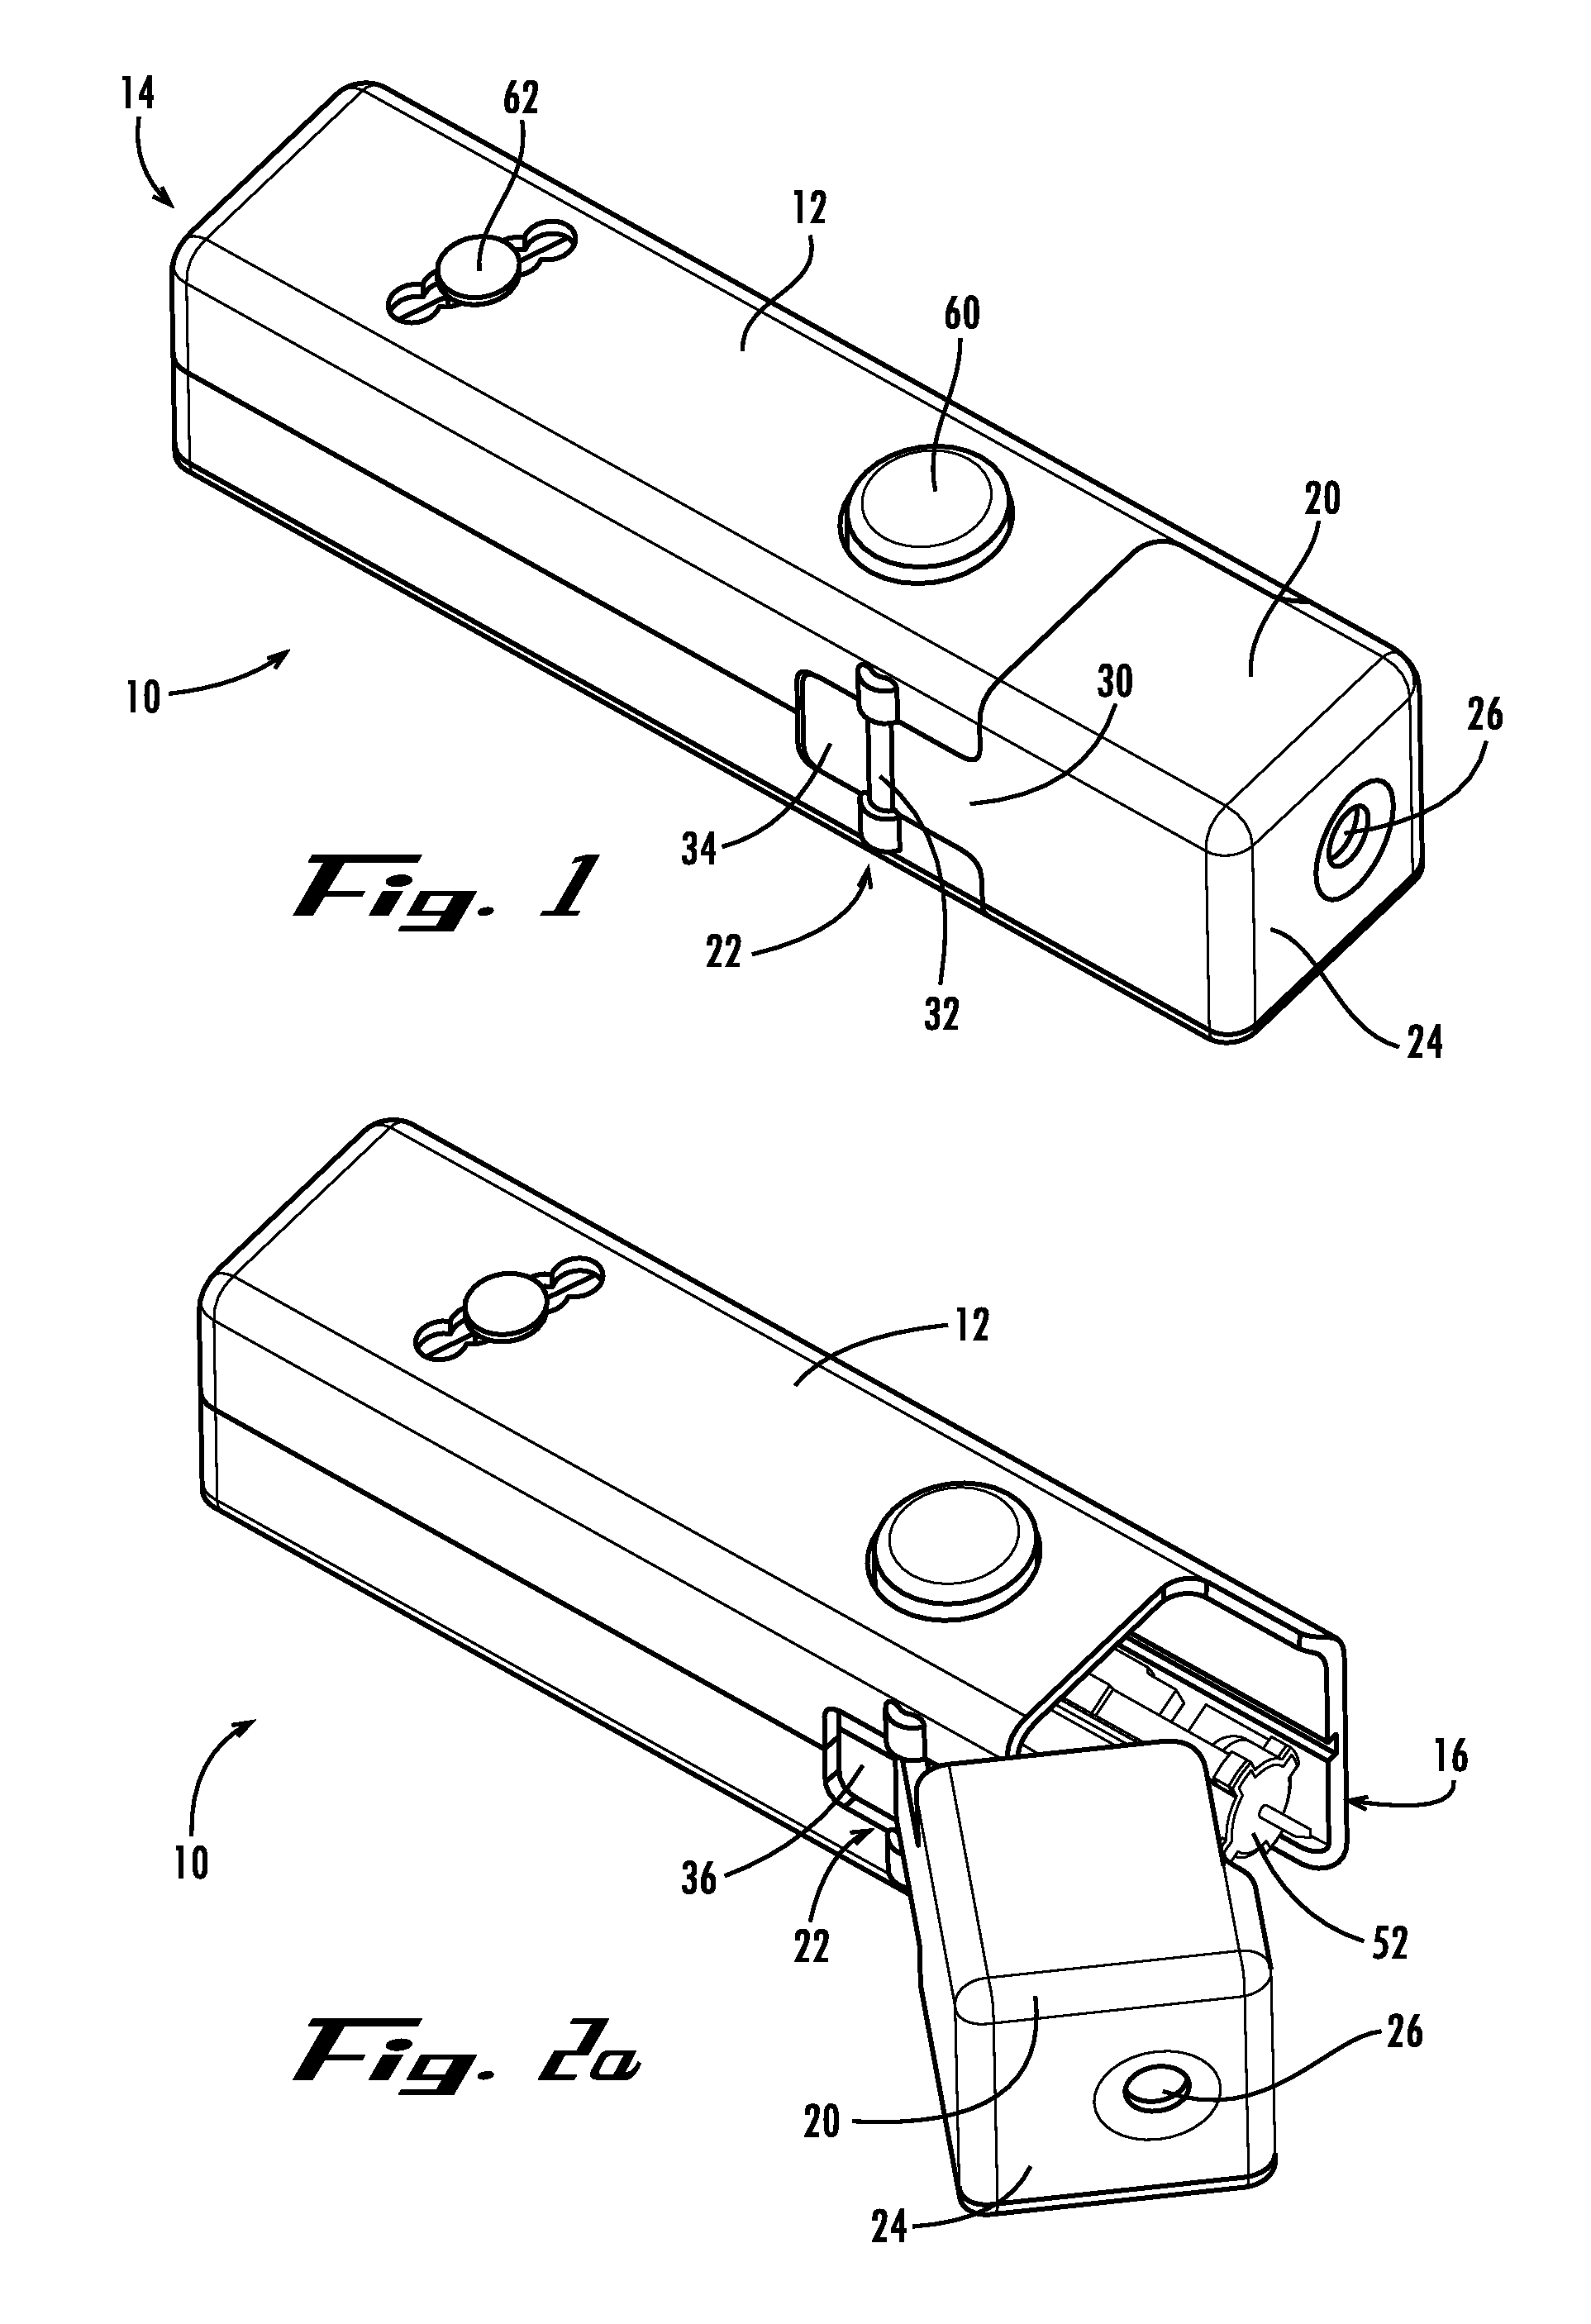 Lancing device with automatic lancet release